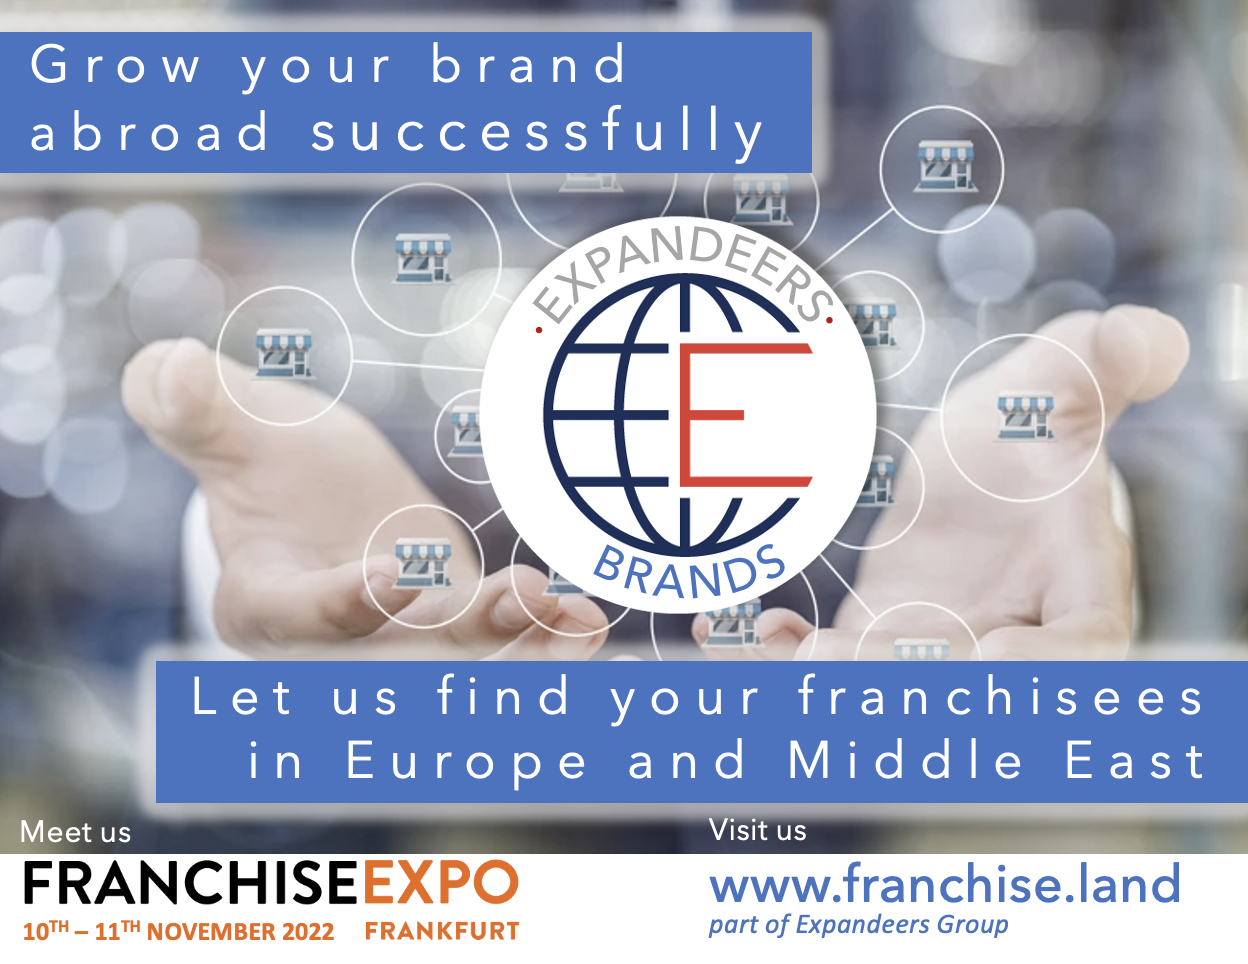 Spreading your Franchise Brand globally